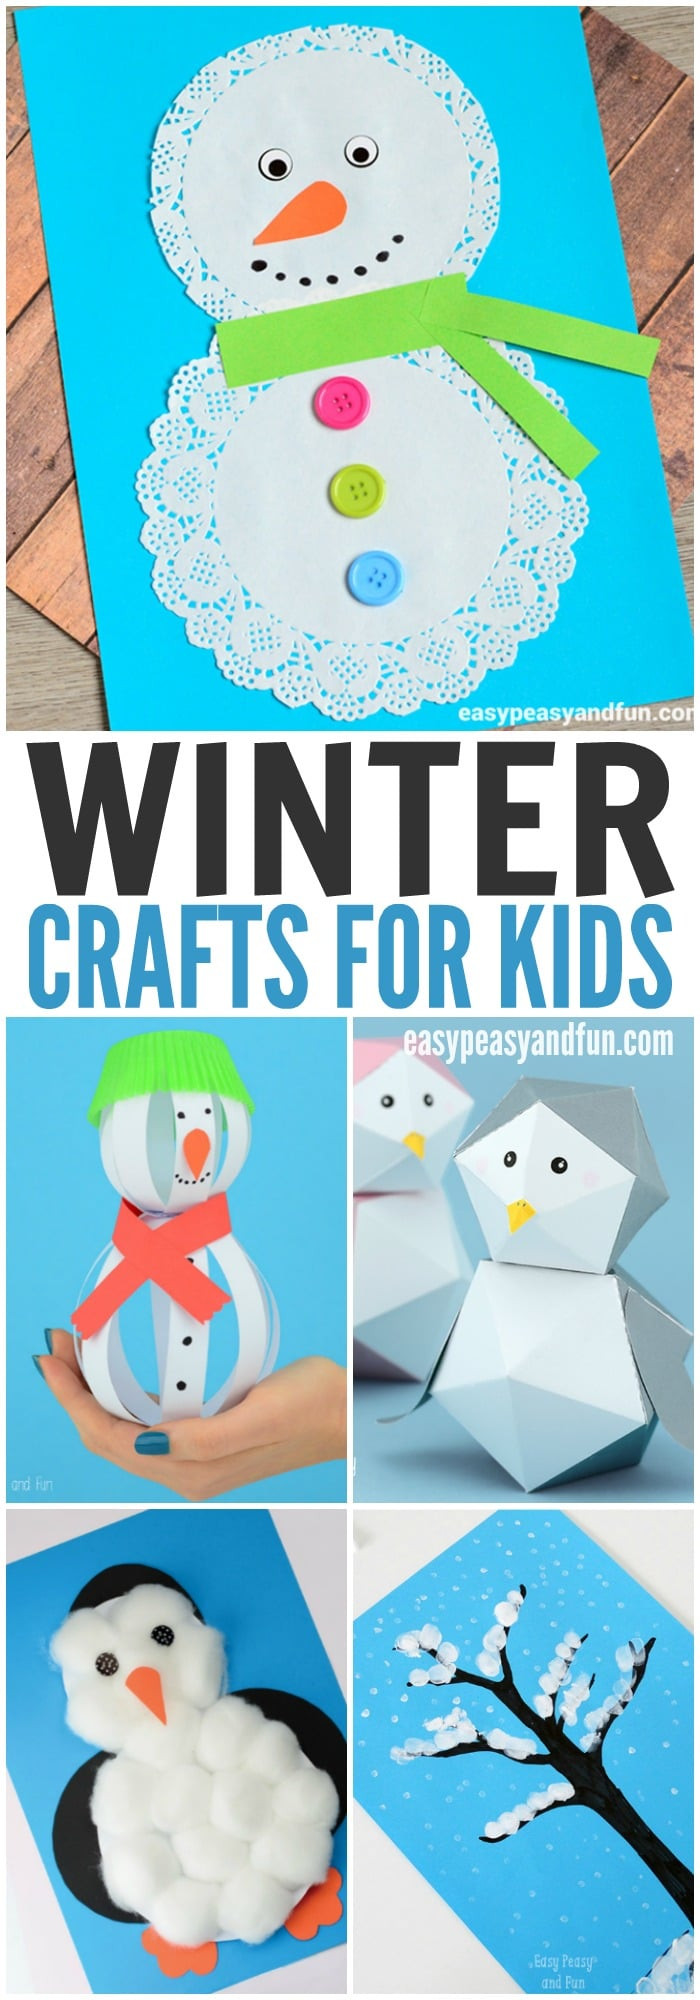 Winter Activities For Kids
 Winter Crafts for Kids to Make Fun Art and Craft Ideas